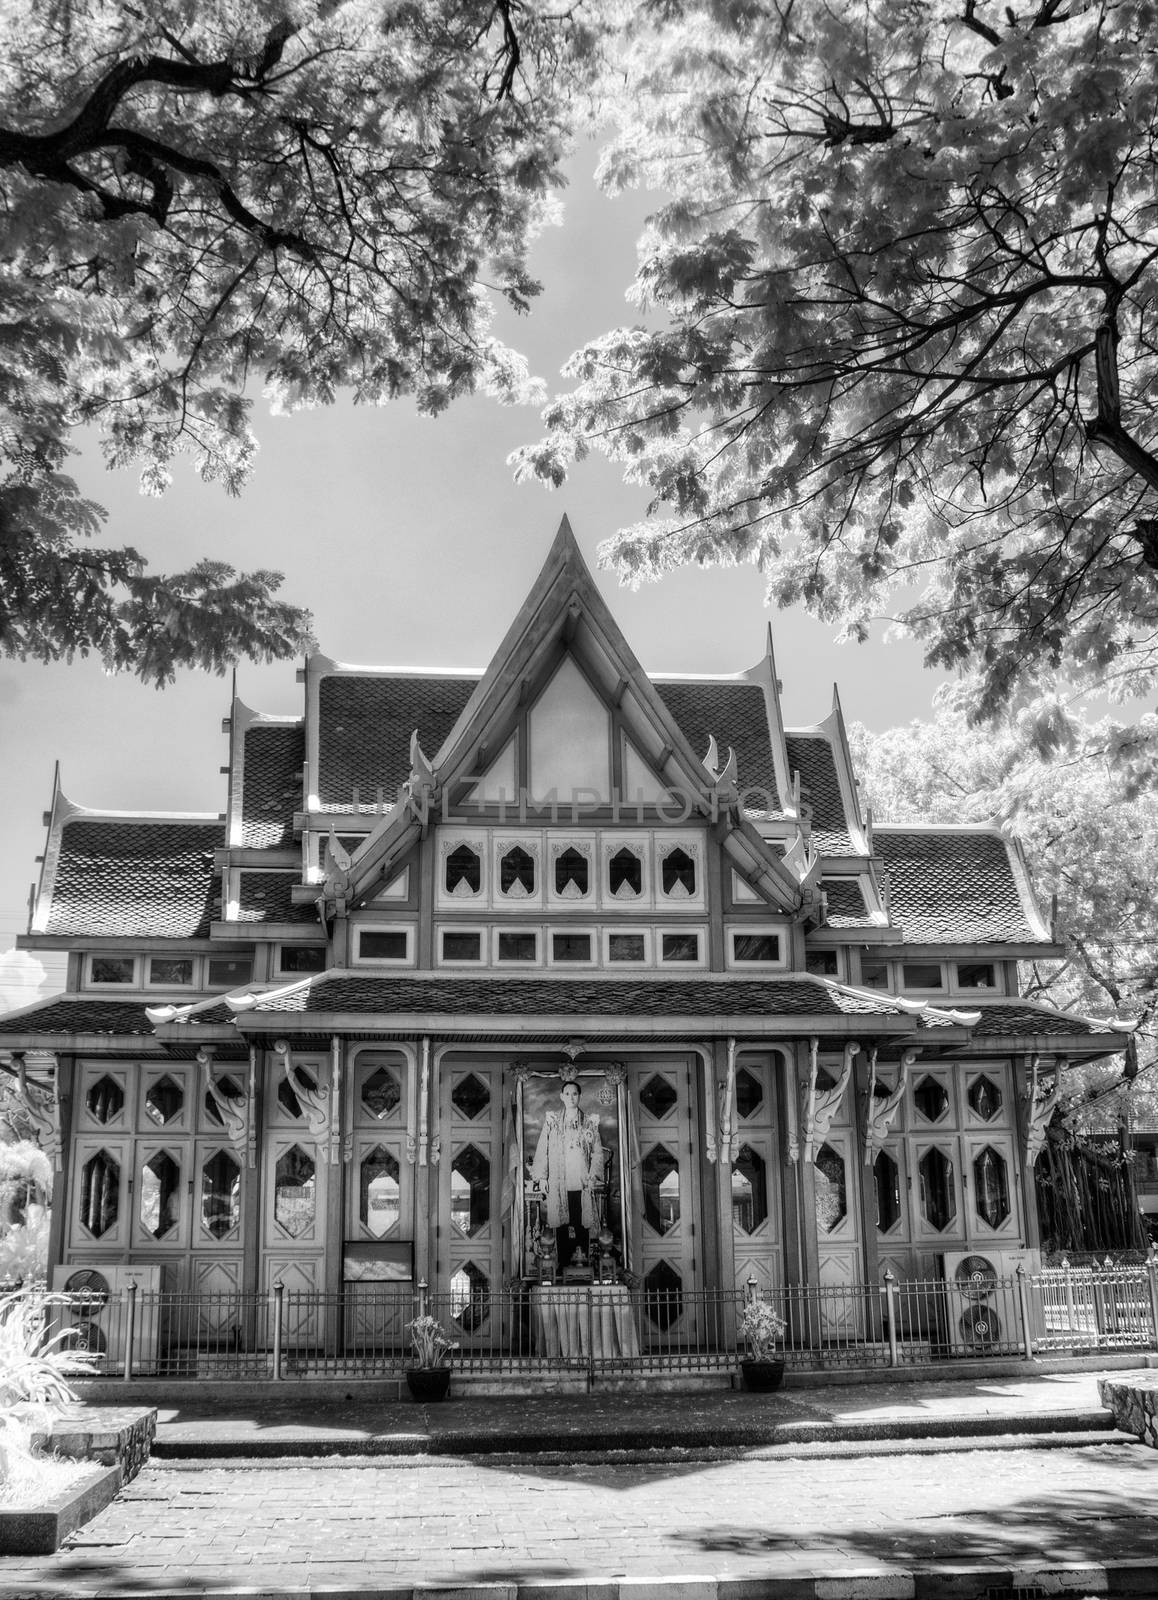 BW Infrared photo Hua Hin train station Thailand by snelsonc